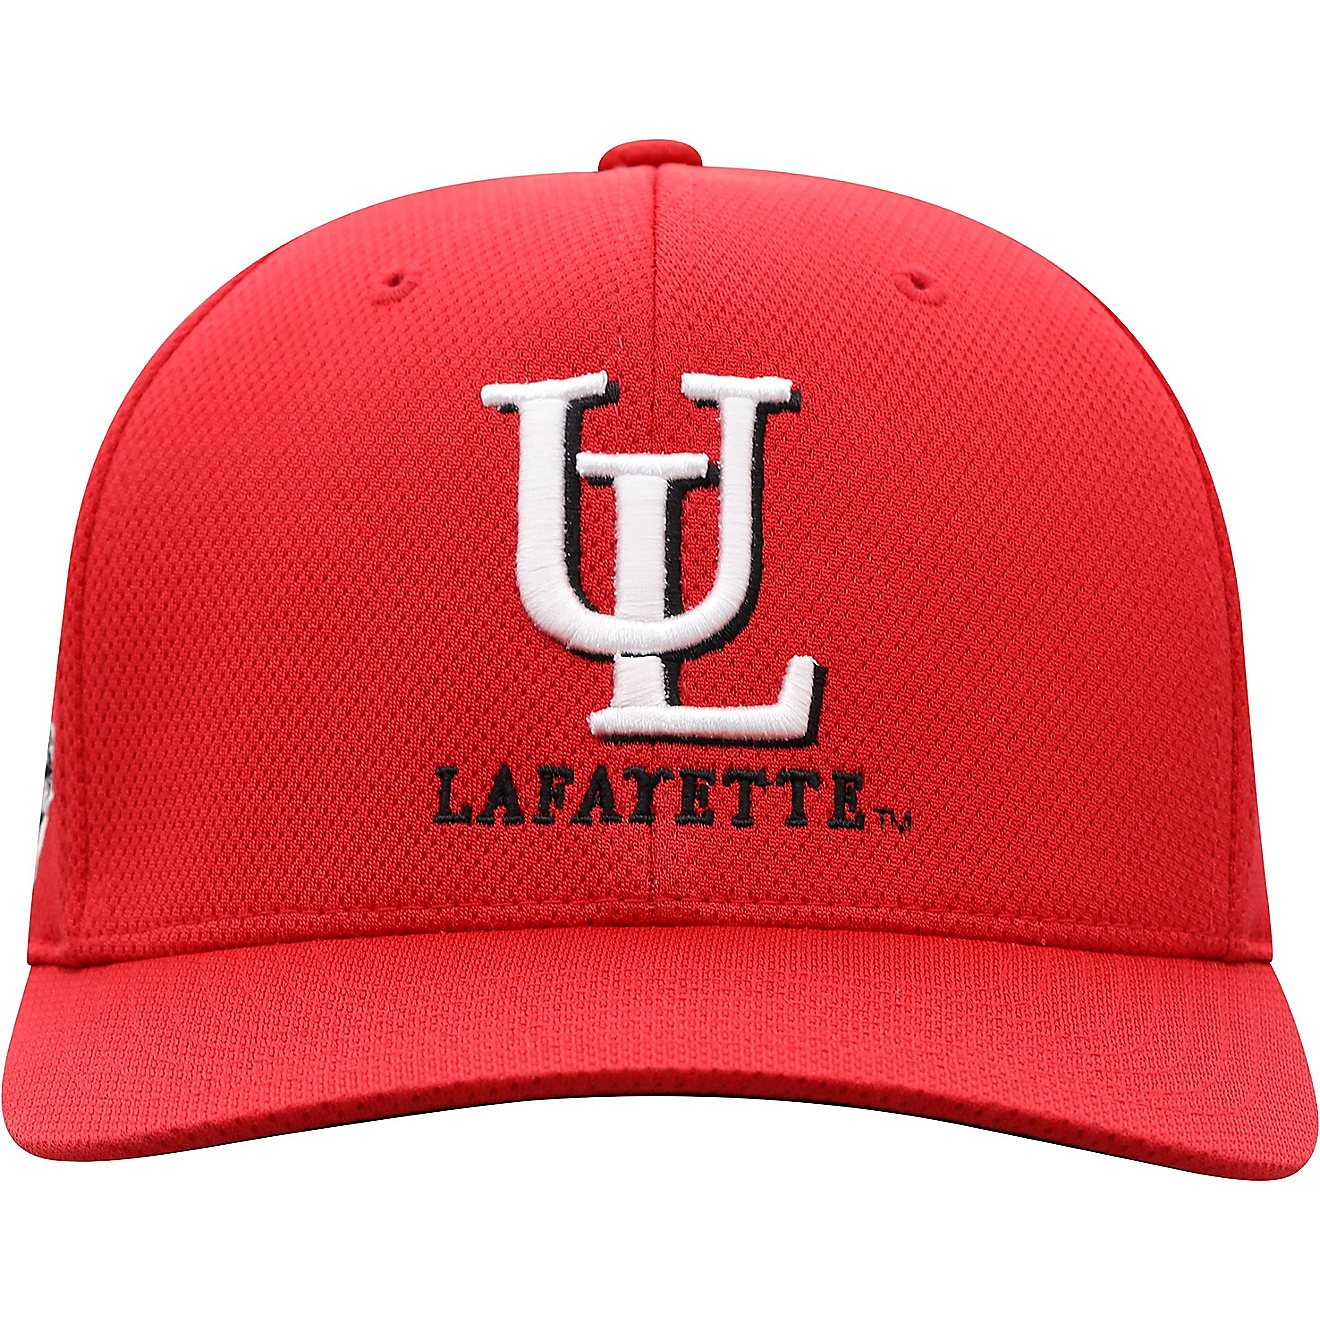 Top of the World Men’s University of Louisiana at Lafayette Reflex Cap                                                         - view number 2